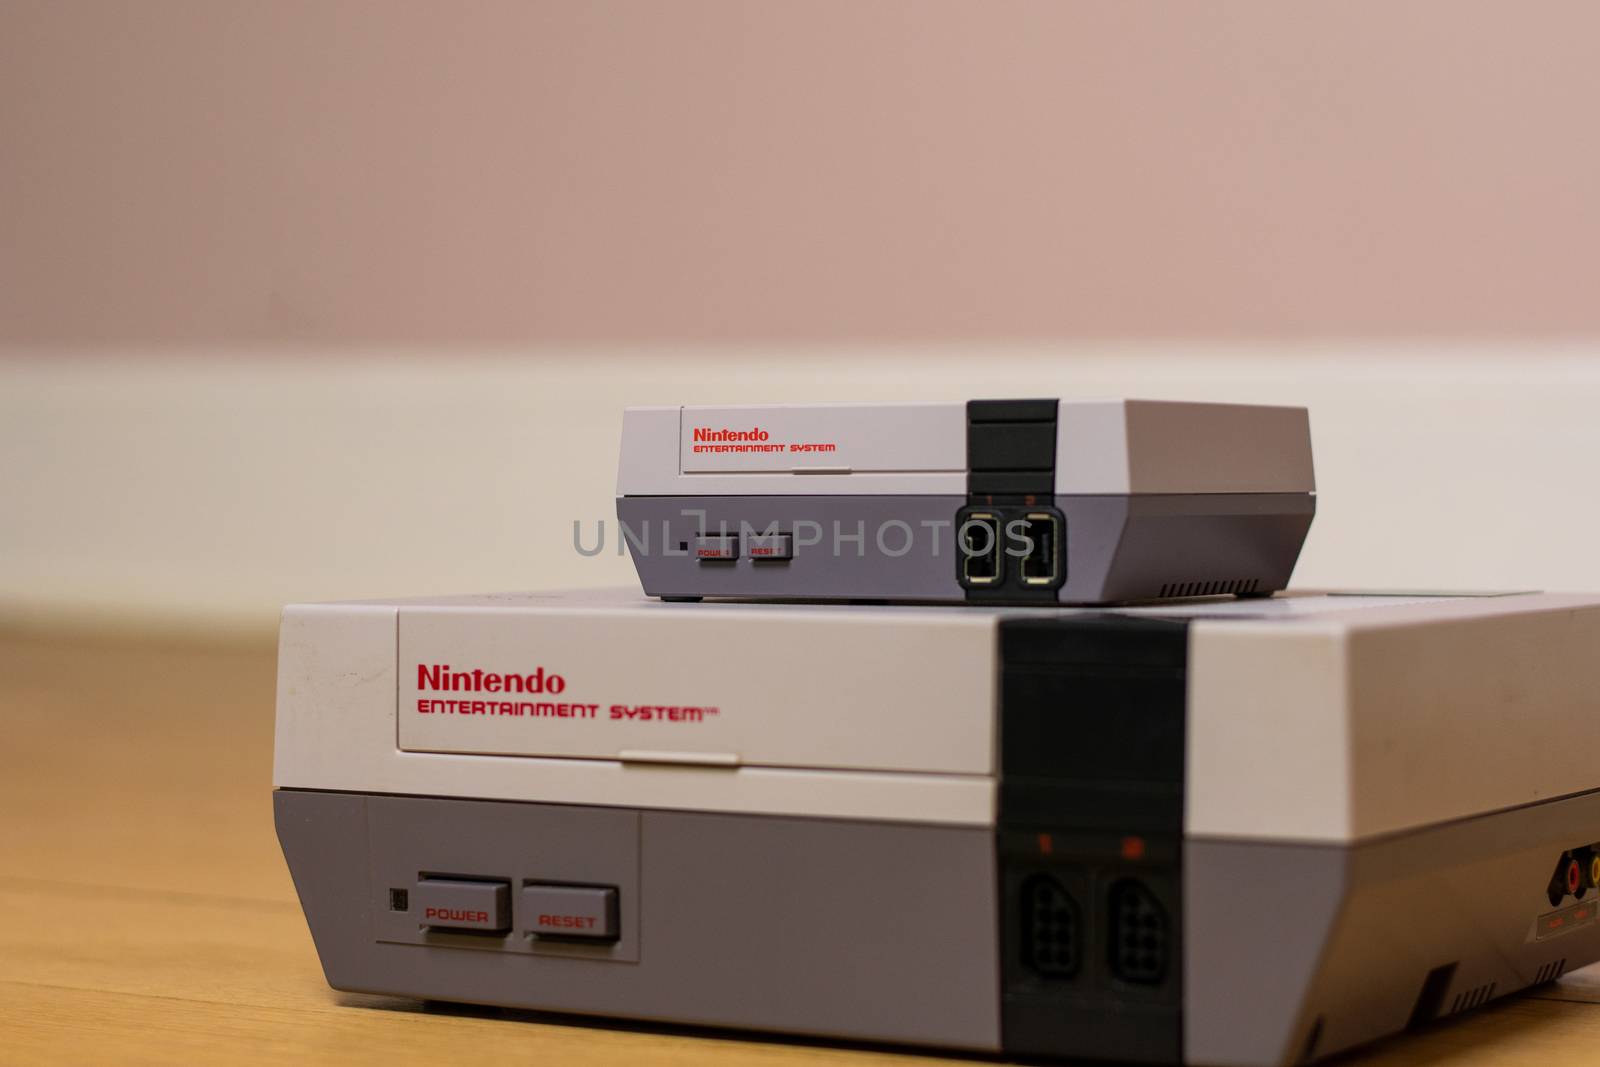 A Nintendo Entertainment System Classic Edition on Top of an Original Nintendo Entertainment System, on a wood floor. Comparison of the original NES against the NES Classic Edition